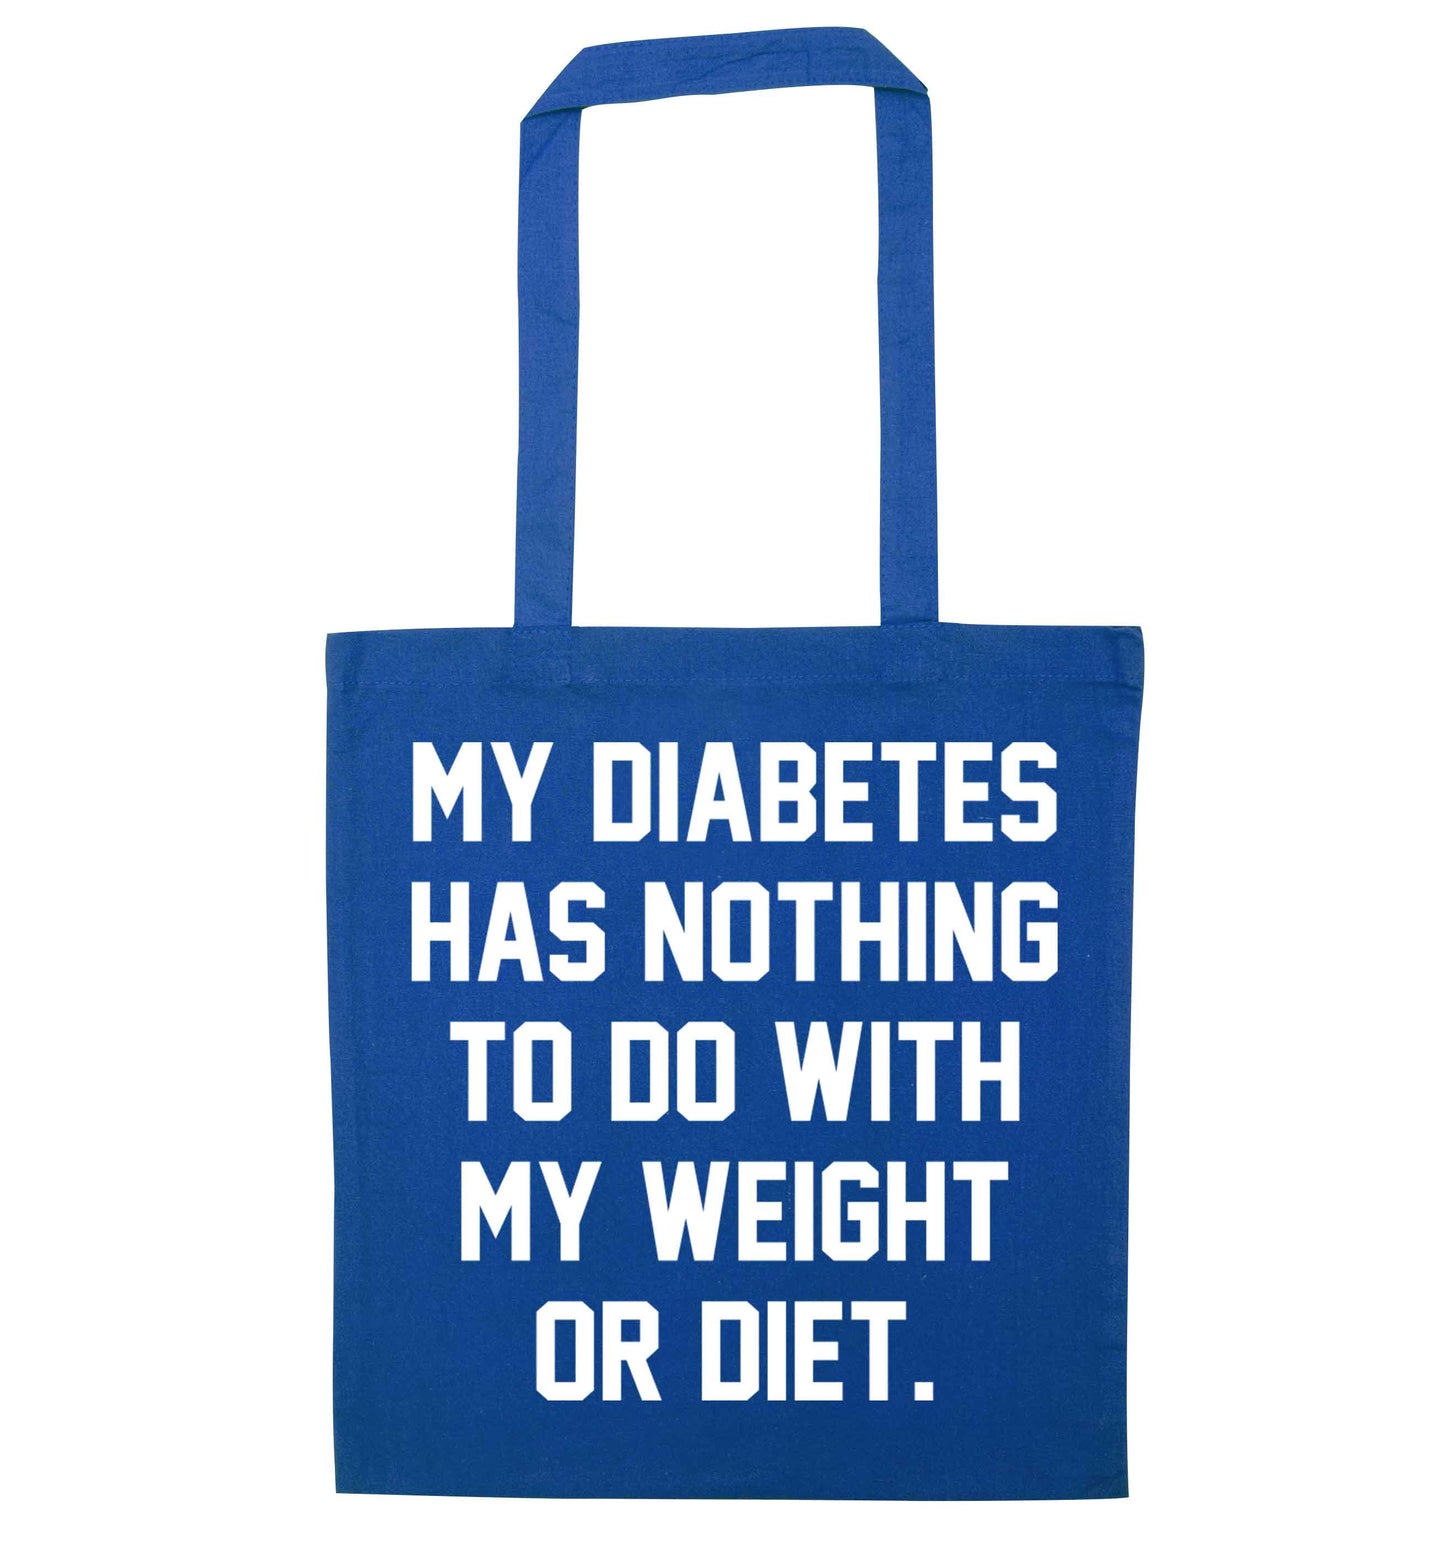 My diabetes has nothing to do with my weight or diet blue tote bag